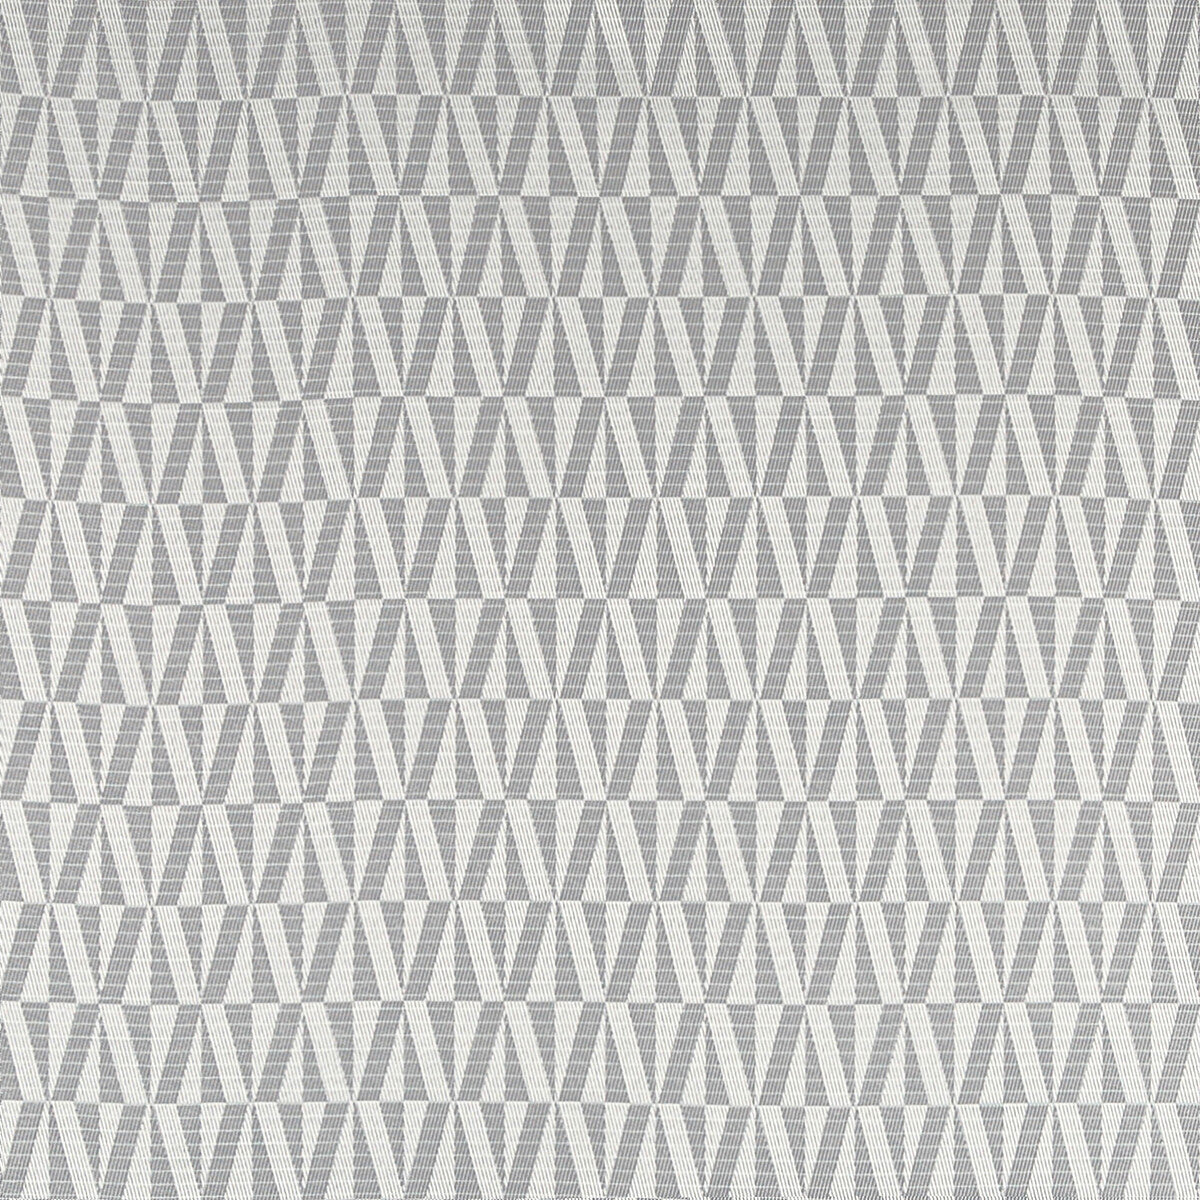 Payton fabric in pewter color - pattern 4656.11.0 - by Kravet Contract